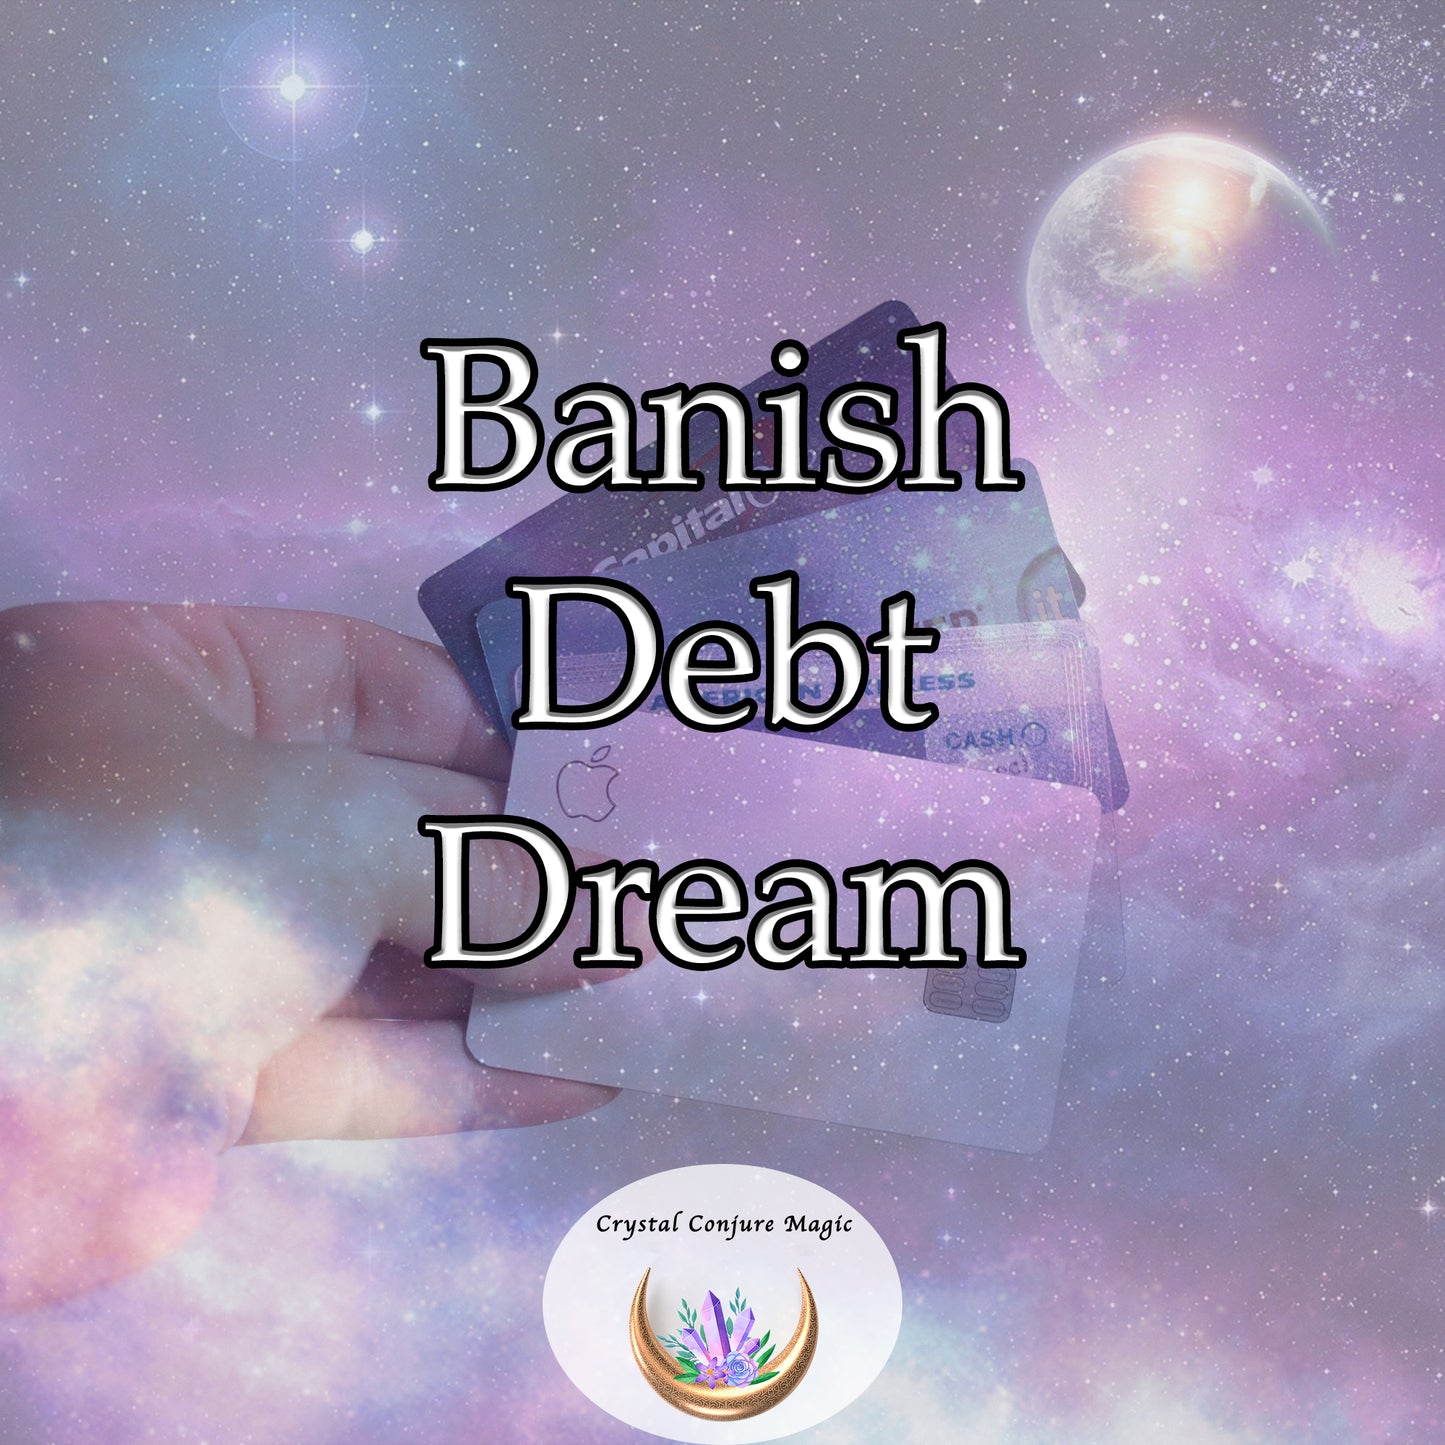 Banish Debt Banish Dream - rid yourself of financial burdens and welcome abundance to your life  - rid yourself of financial burdens and welcome abundance to your life